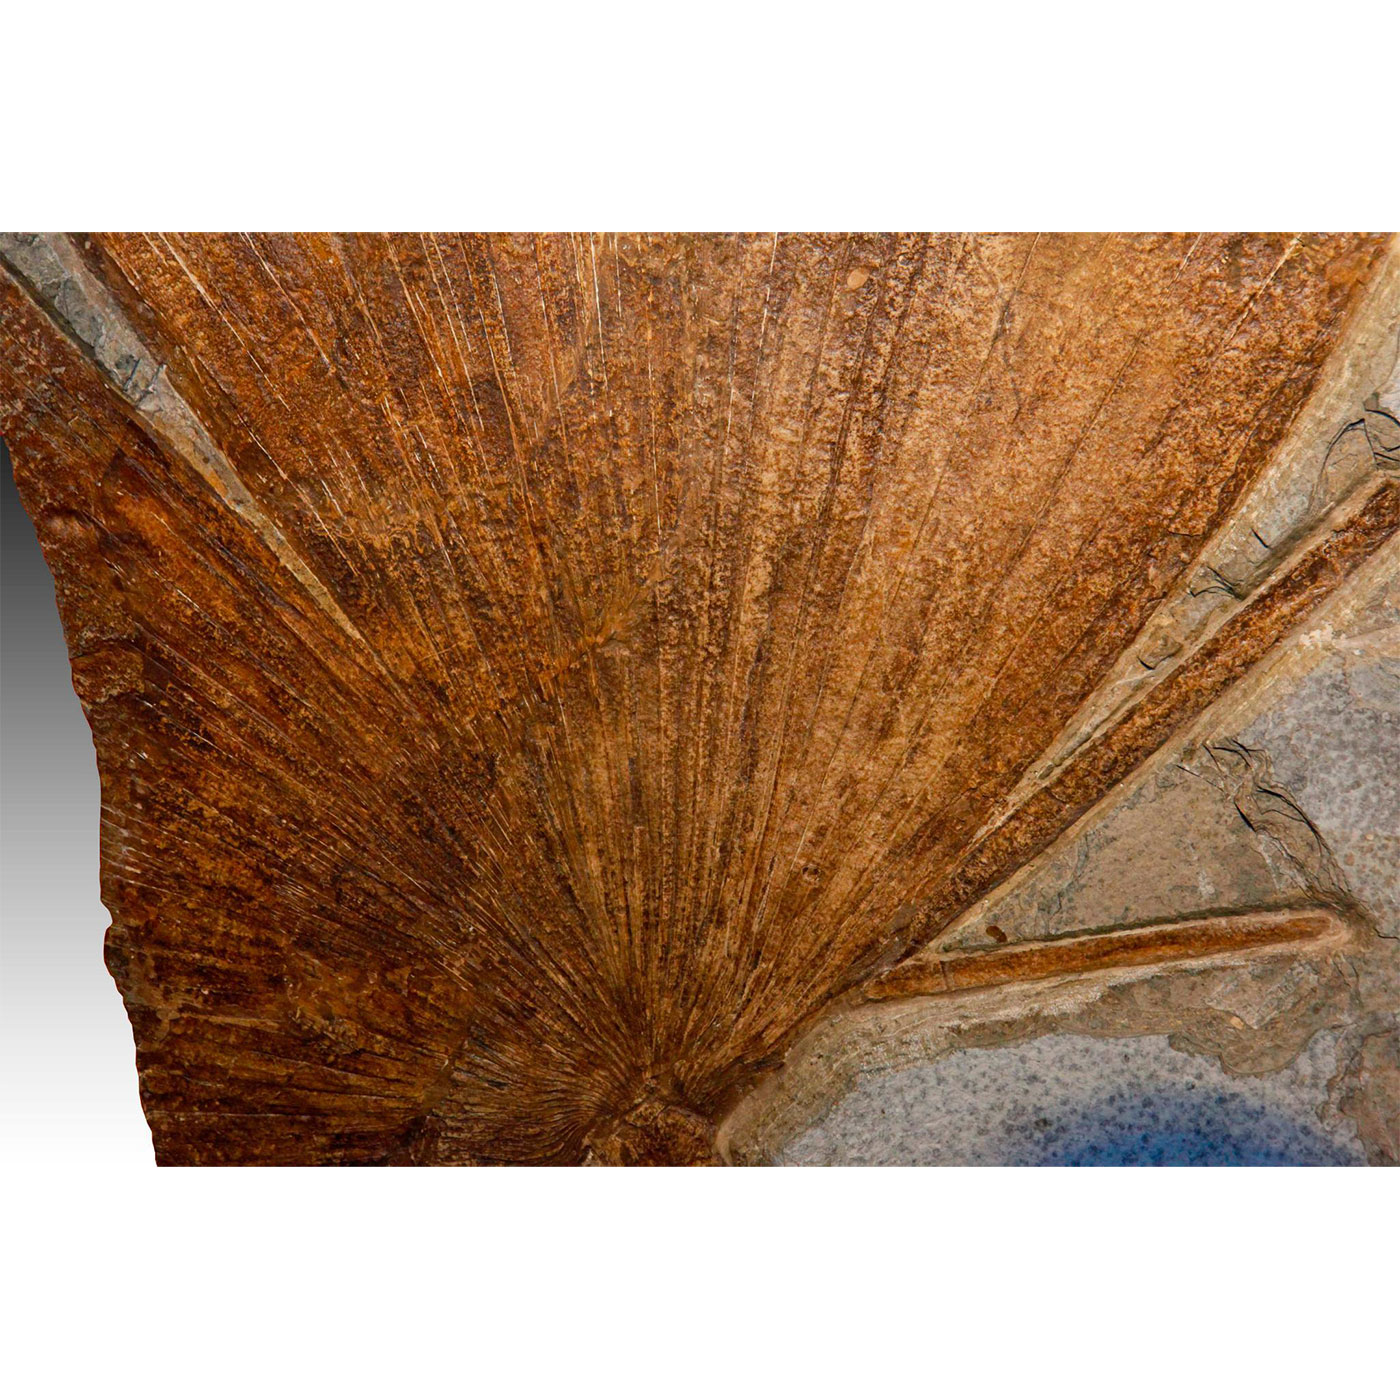 PARTIAL FOSSIL PALM FROND, GREEN RIVER, WYOMING - Image 3 of 4